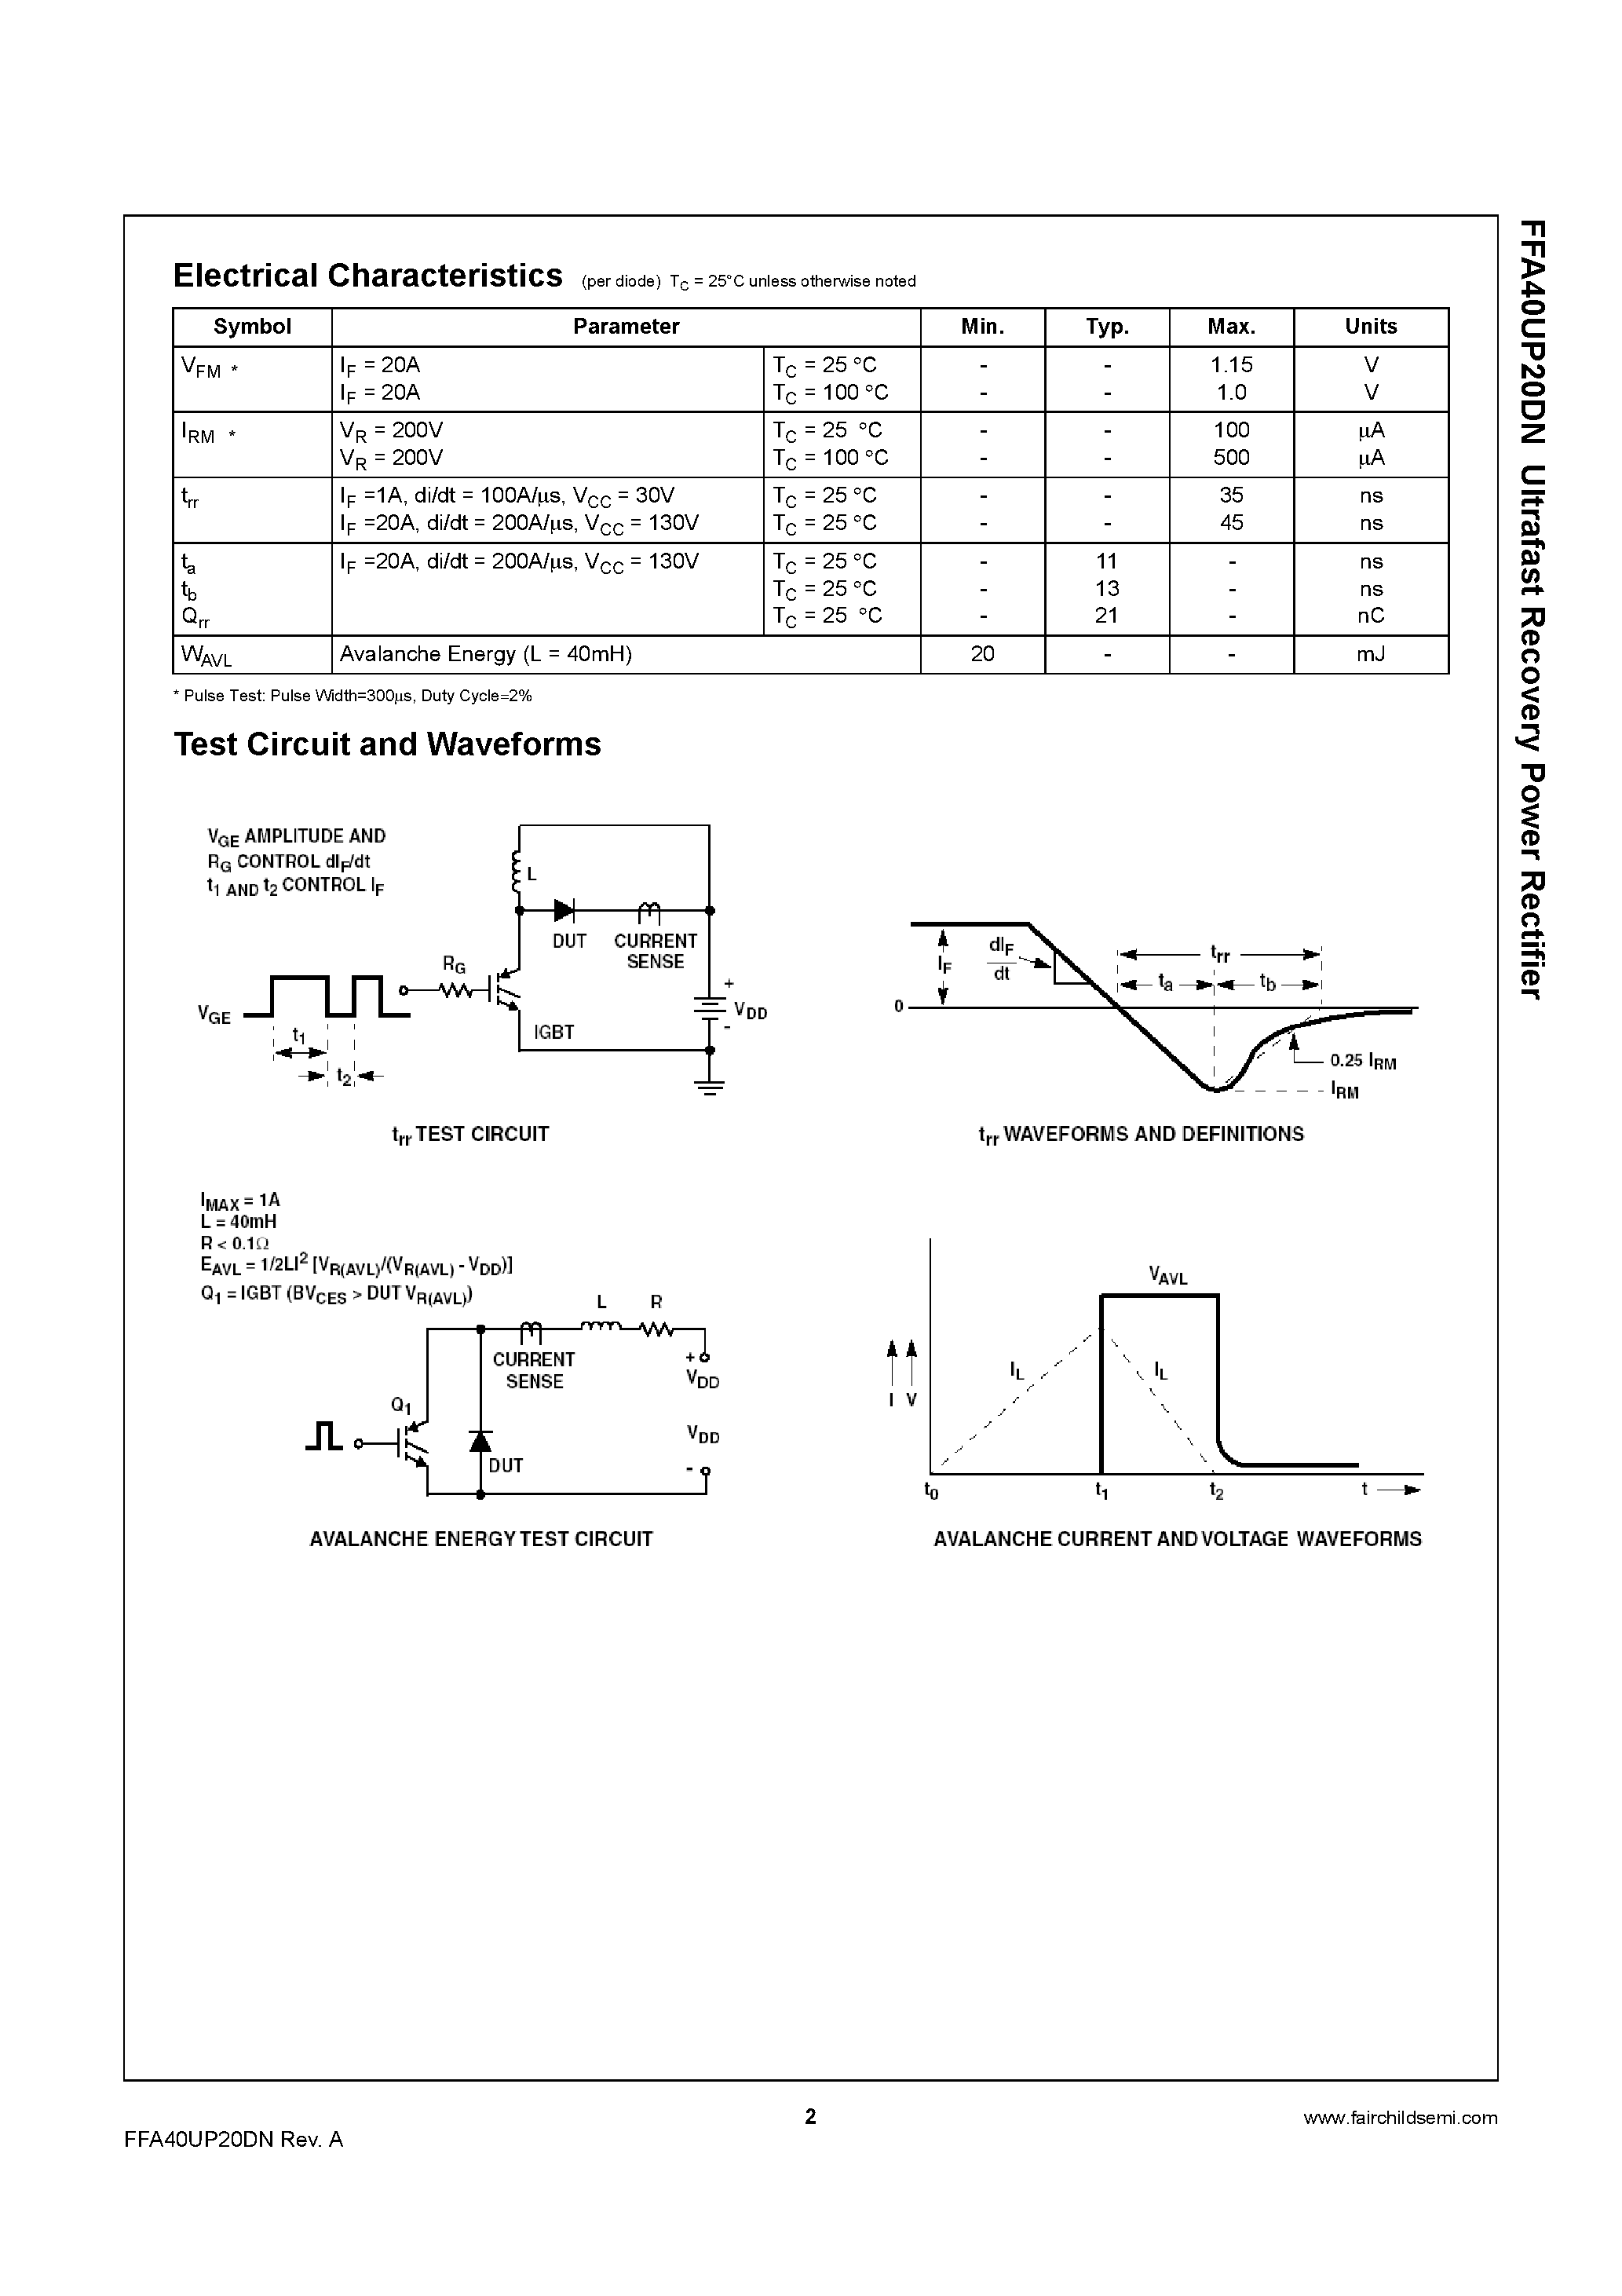 Datasheet FFA40UP20DN - Ultrafast Recovery Power Rectifier page 2